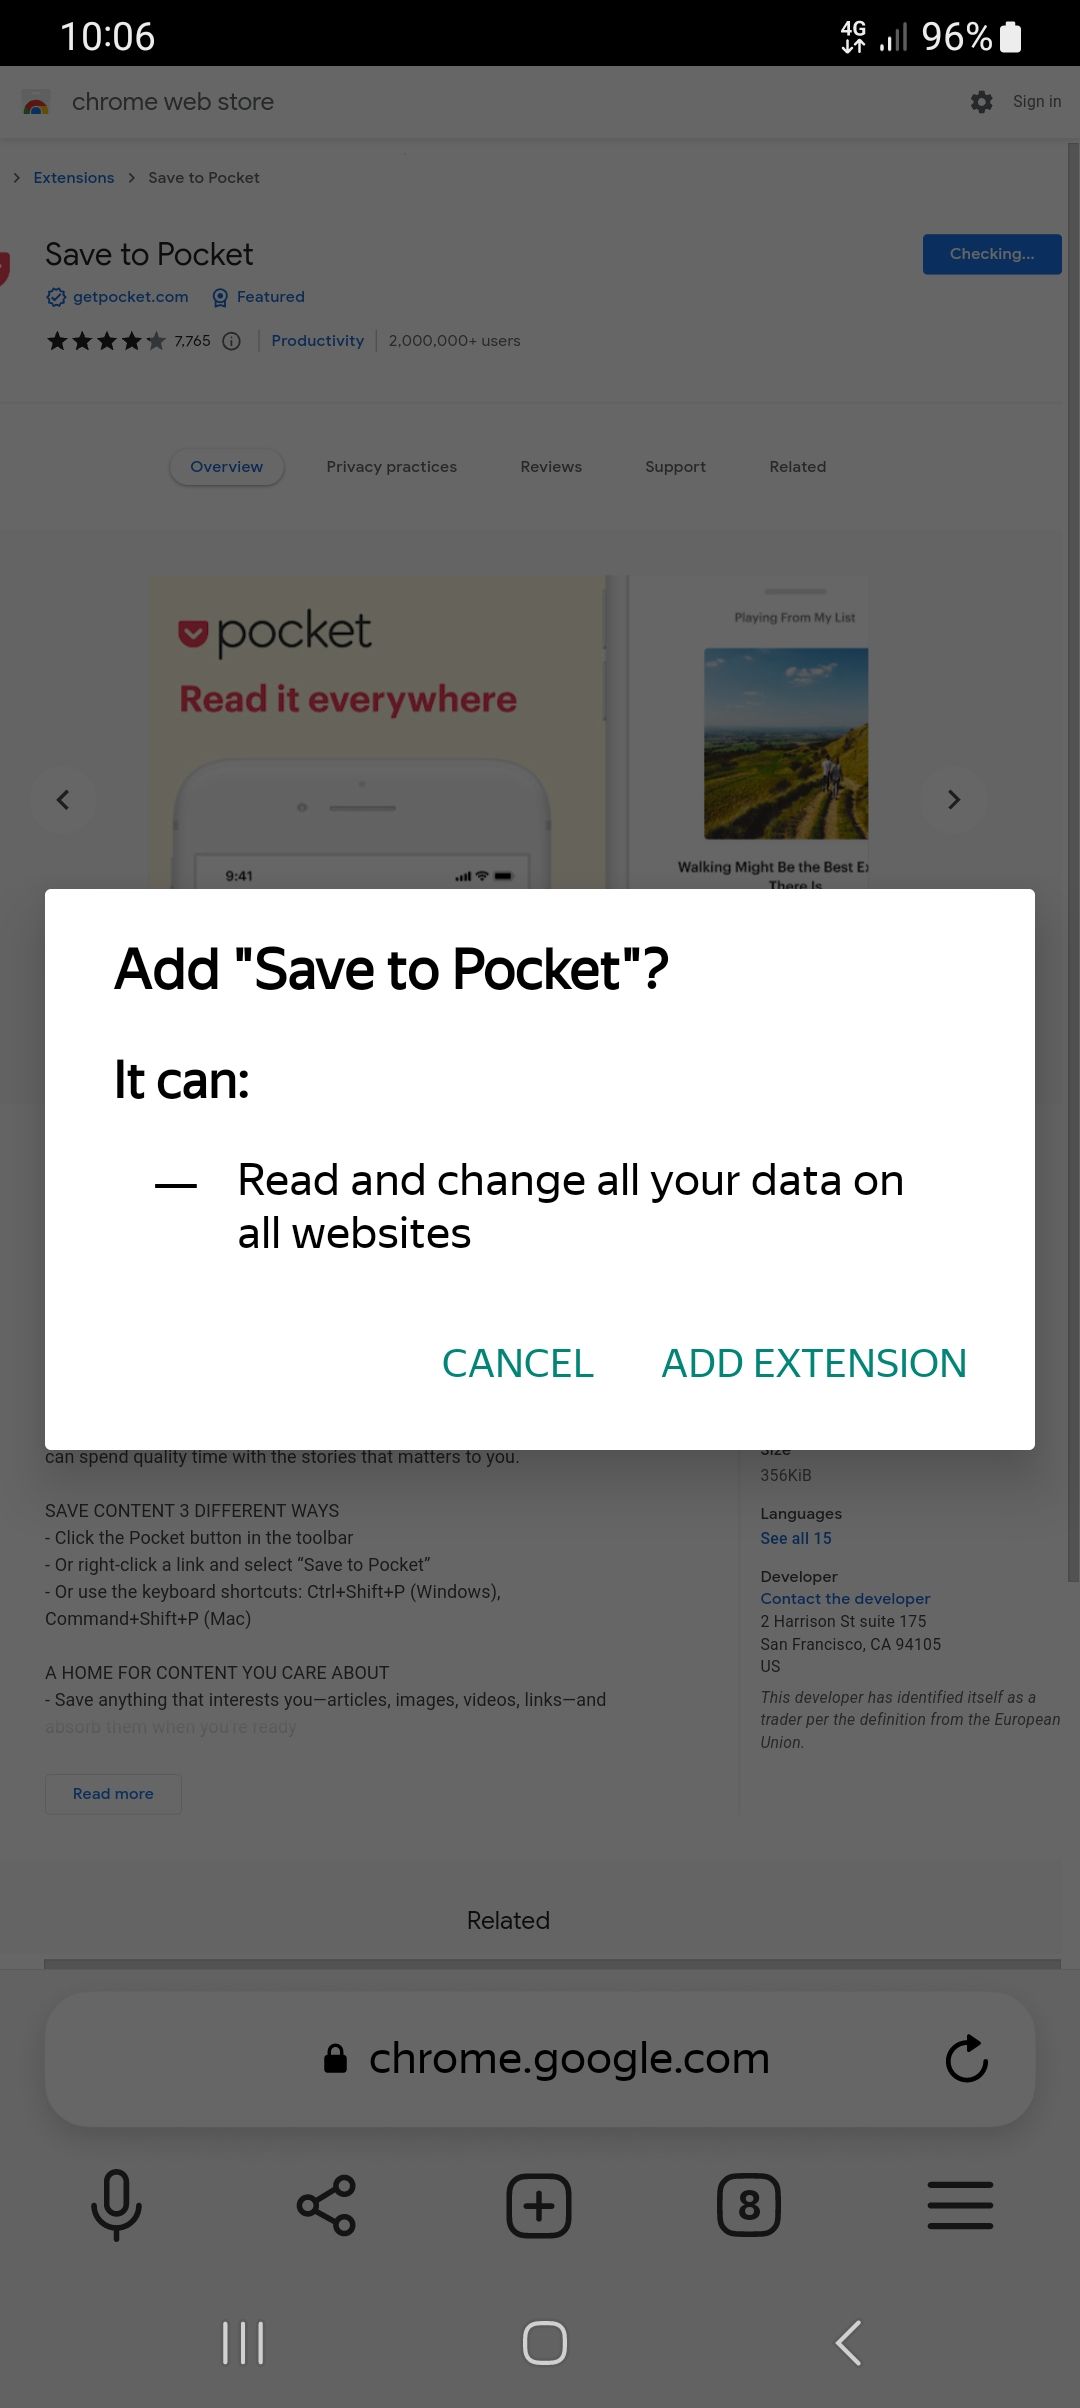 Add an extension to Yandex browser on Android